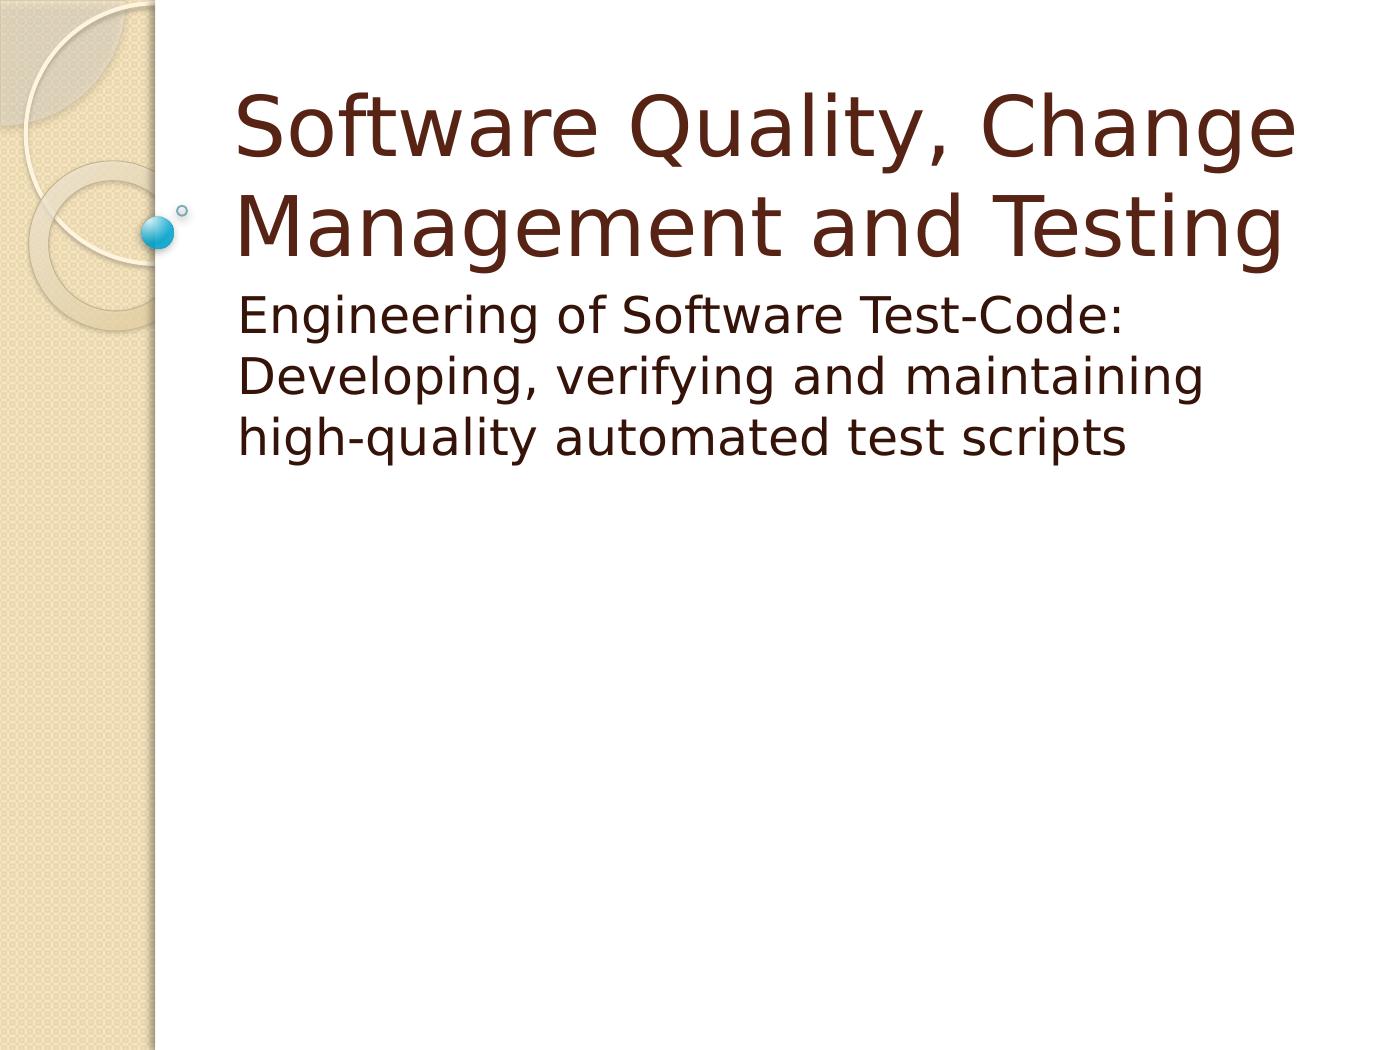 Software Quality, Change Management and Testing Presentation 2022_1